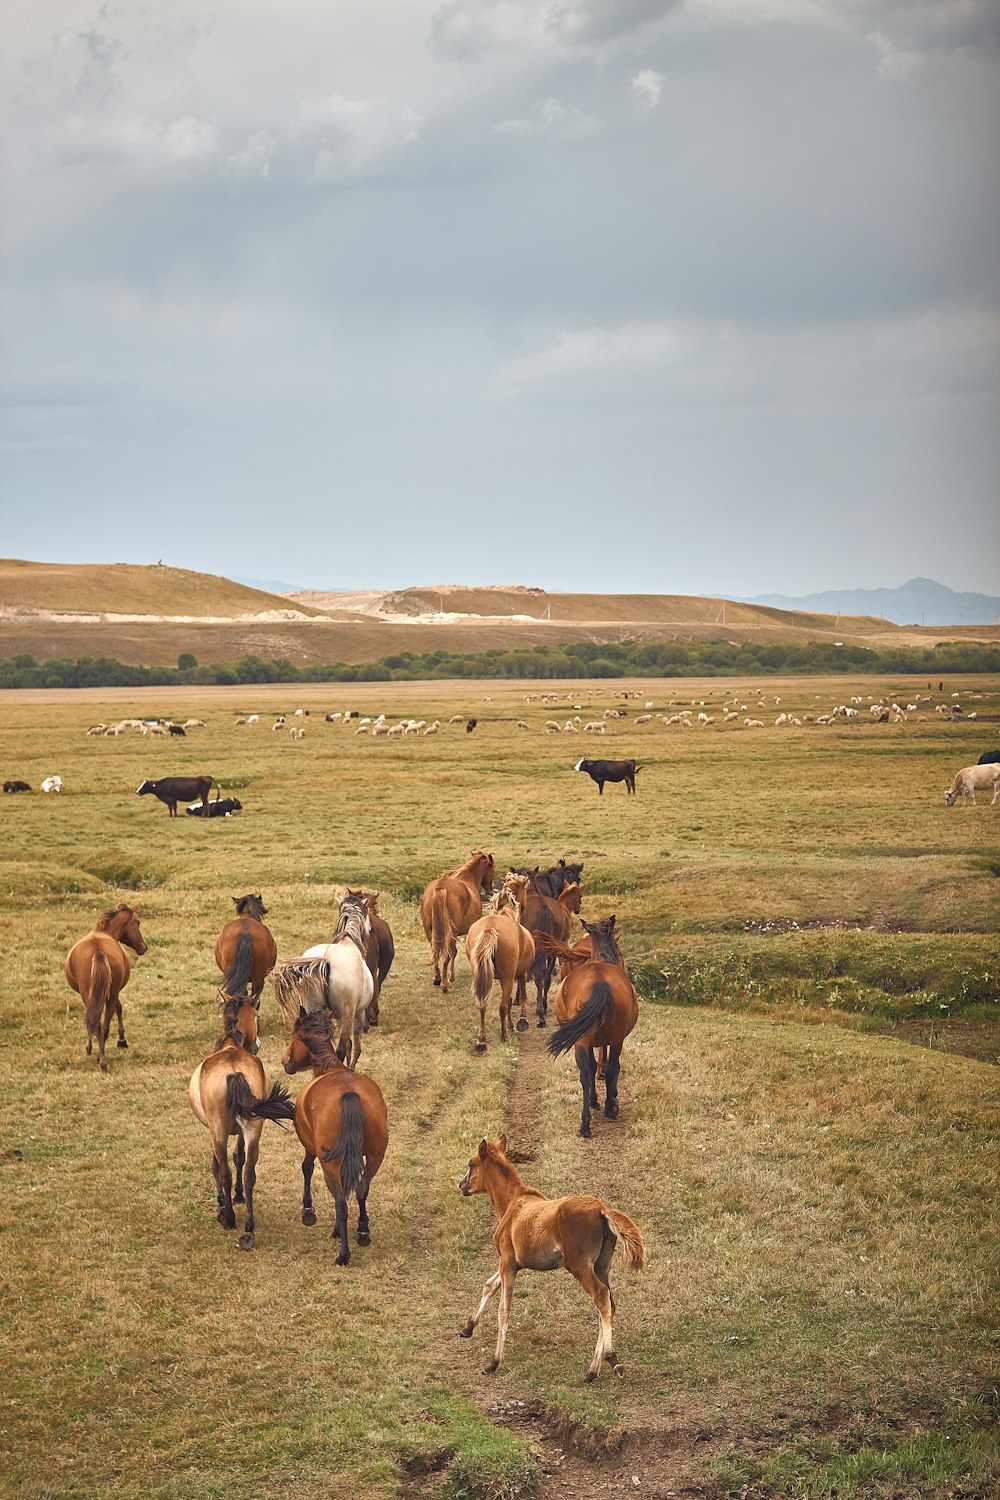 a person riding a horse in a field with a herd of horses